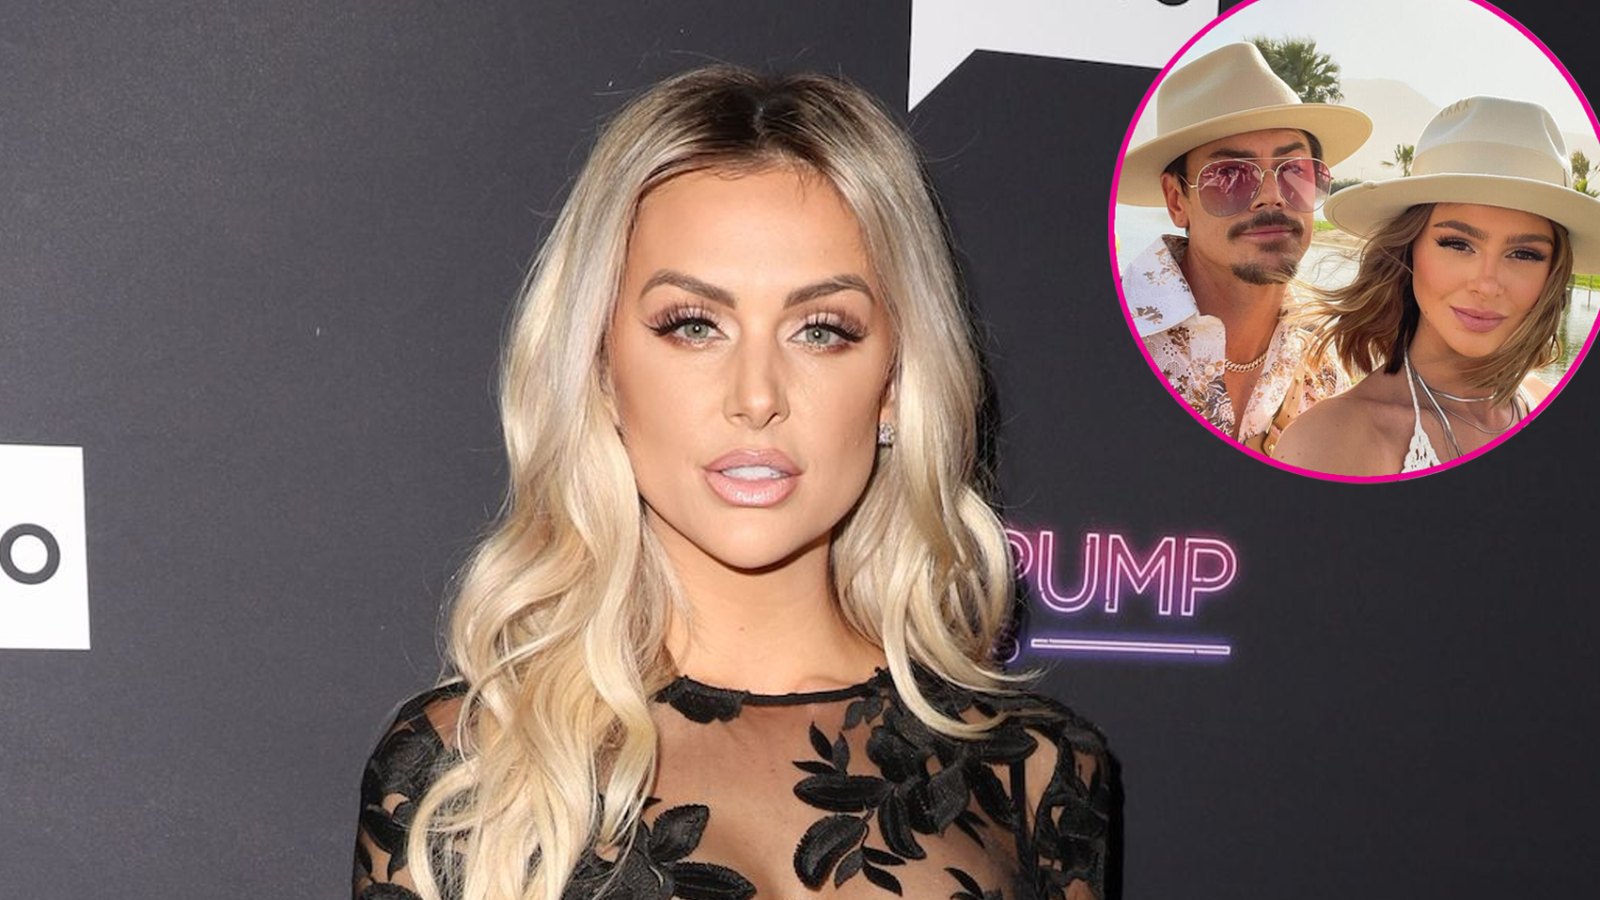 Lala Kent Suspects Tom Sandoval and Raquel Leviss Could Still Be ‘Fully Together’ Amid Affair Scandal